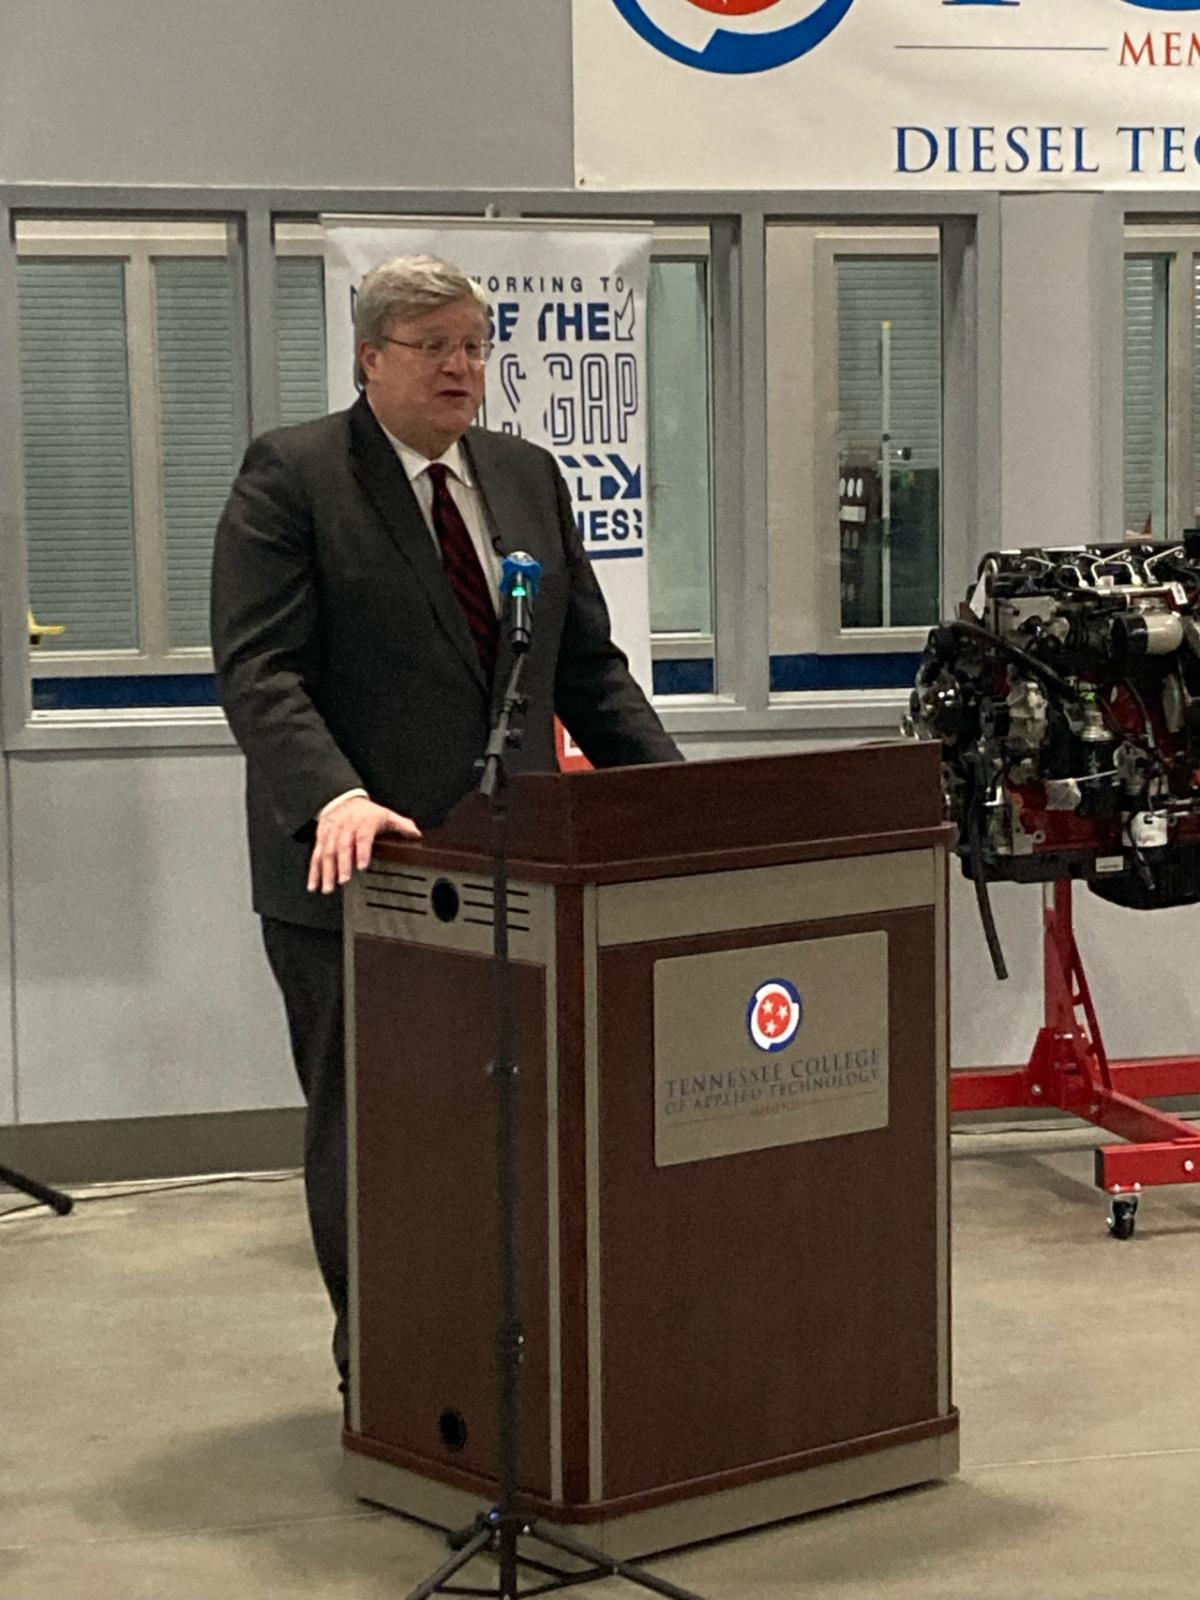 Memphis Mayor, Jim Strickland speaks at announcement of the Cummins Technical Education for Communities (TEC) initiative at the Tennessee College of Applied Technology Memphis (TCAT Memphis).